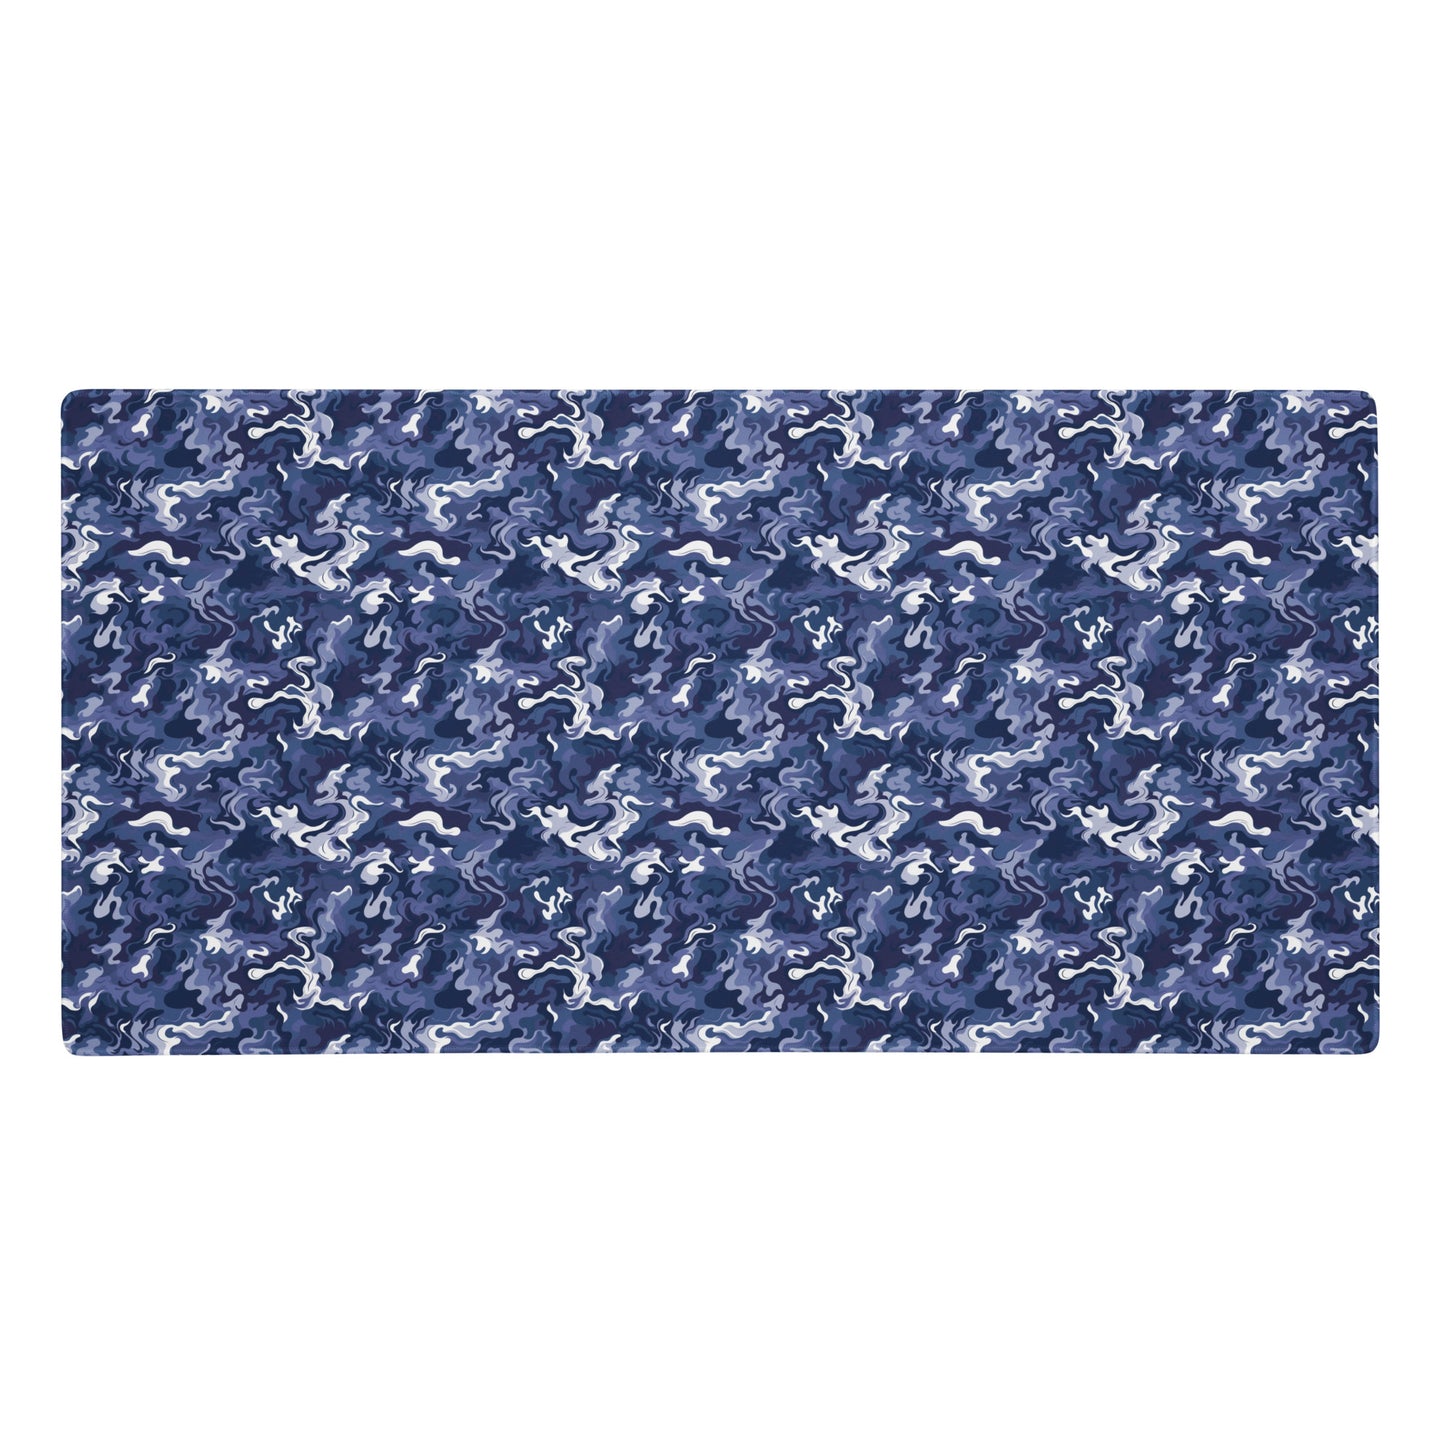 A 36" x 18" desk pad with a royal blue and white camo pattern.